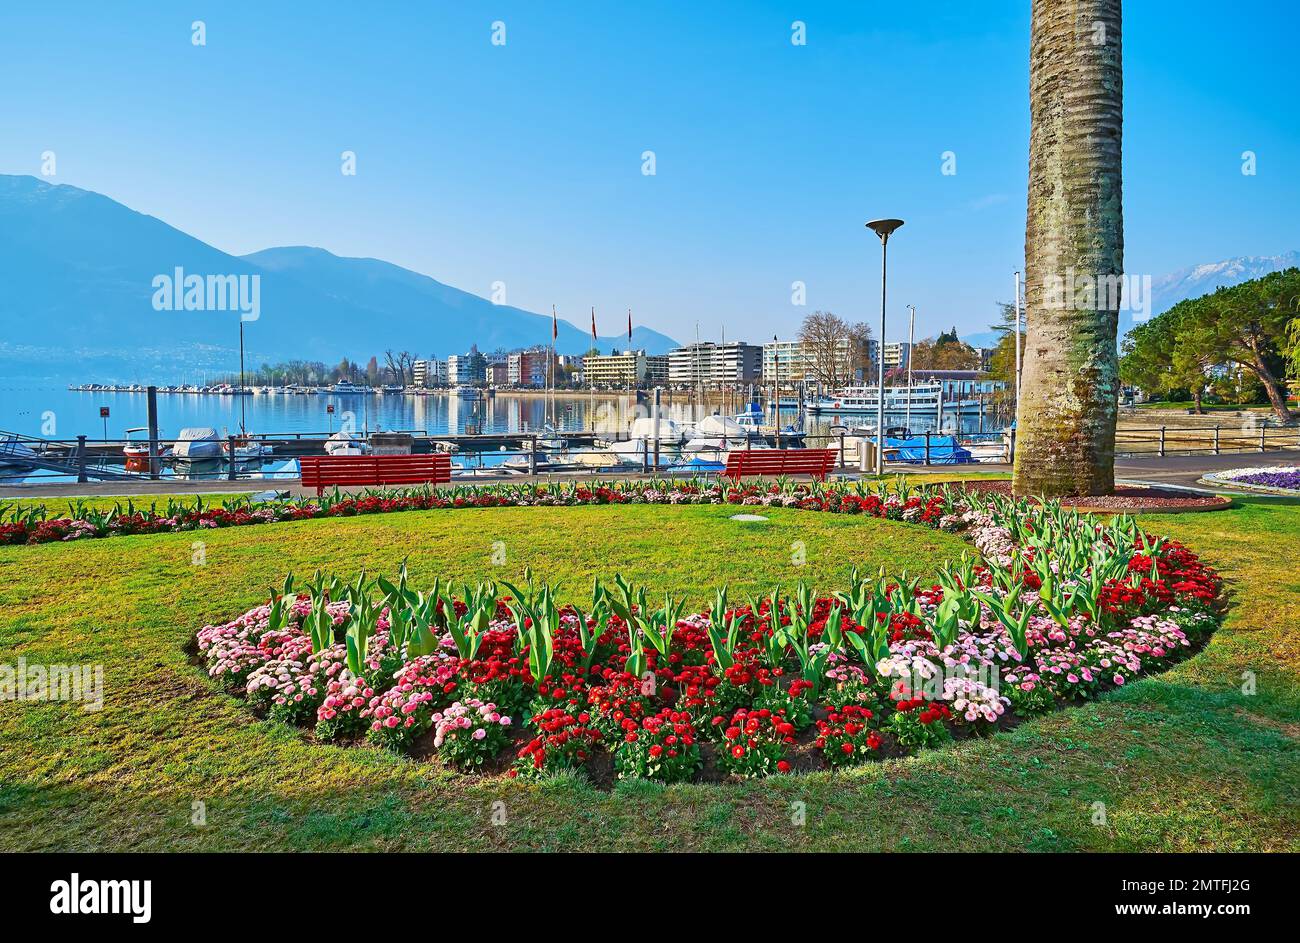 The lakeside park with green lawn, ornamental flower beds of red and pink daisies against the part and foggy Alps, Lake Maggiore, Locarno, Switzerland Stock Photo